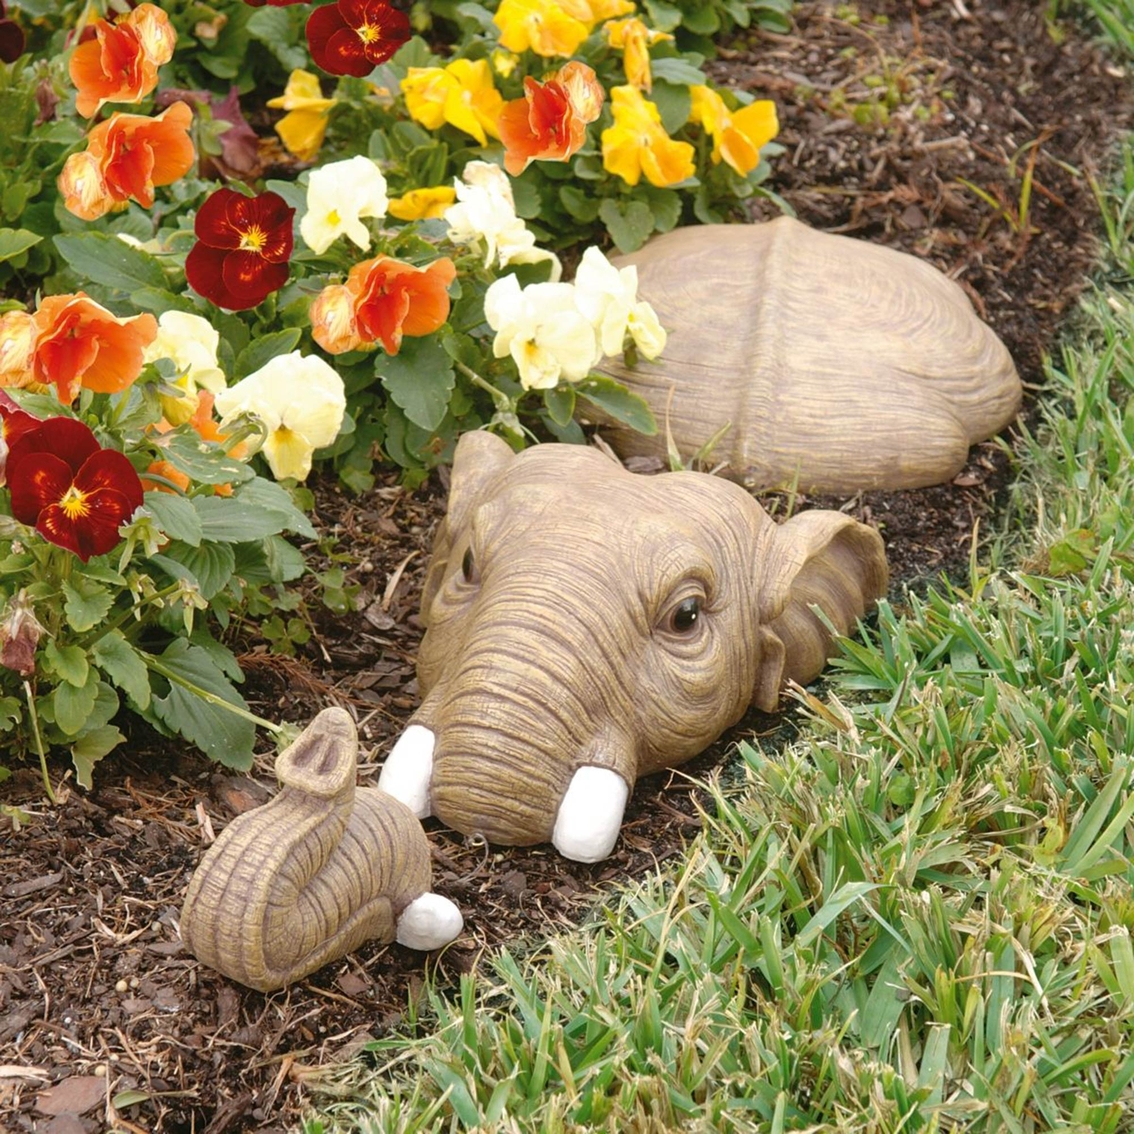 Design Toscano In For a Swim Elephant Lawn Sculpture